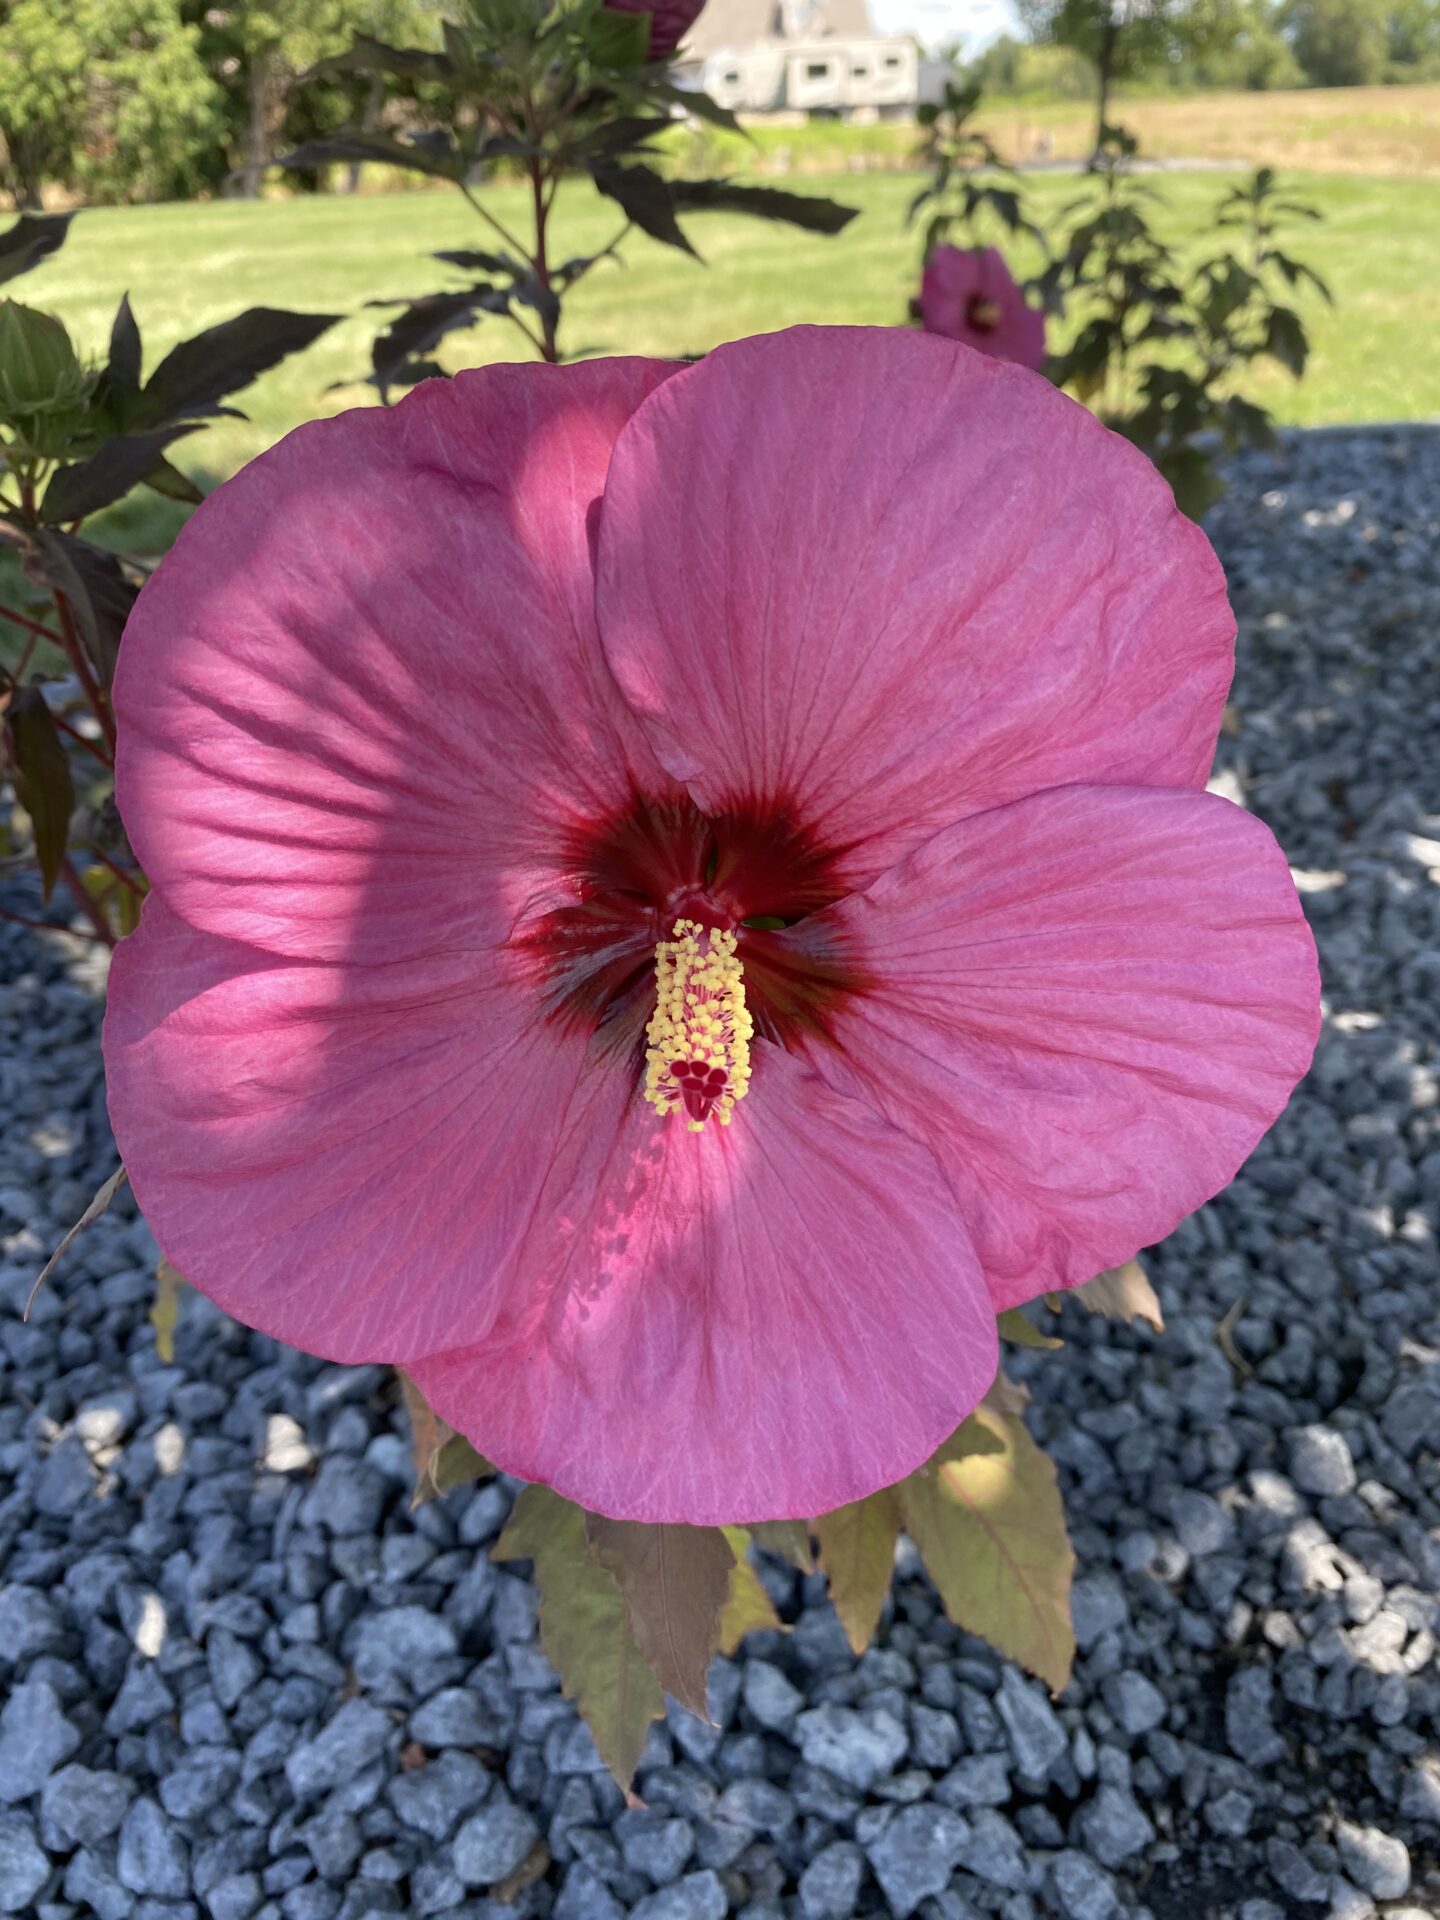 A vibrant pink hibiscus flower with a prominent stamen, set against a background of gray pebbles, with a blurry green landscape and structure beyond.